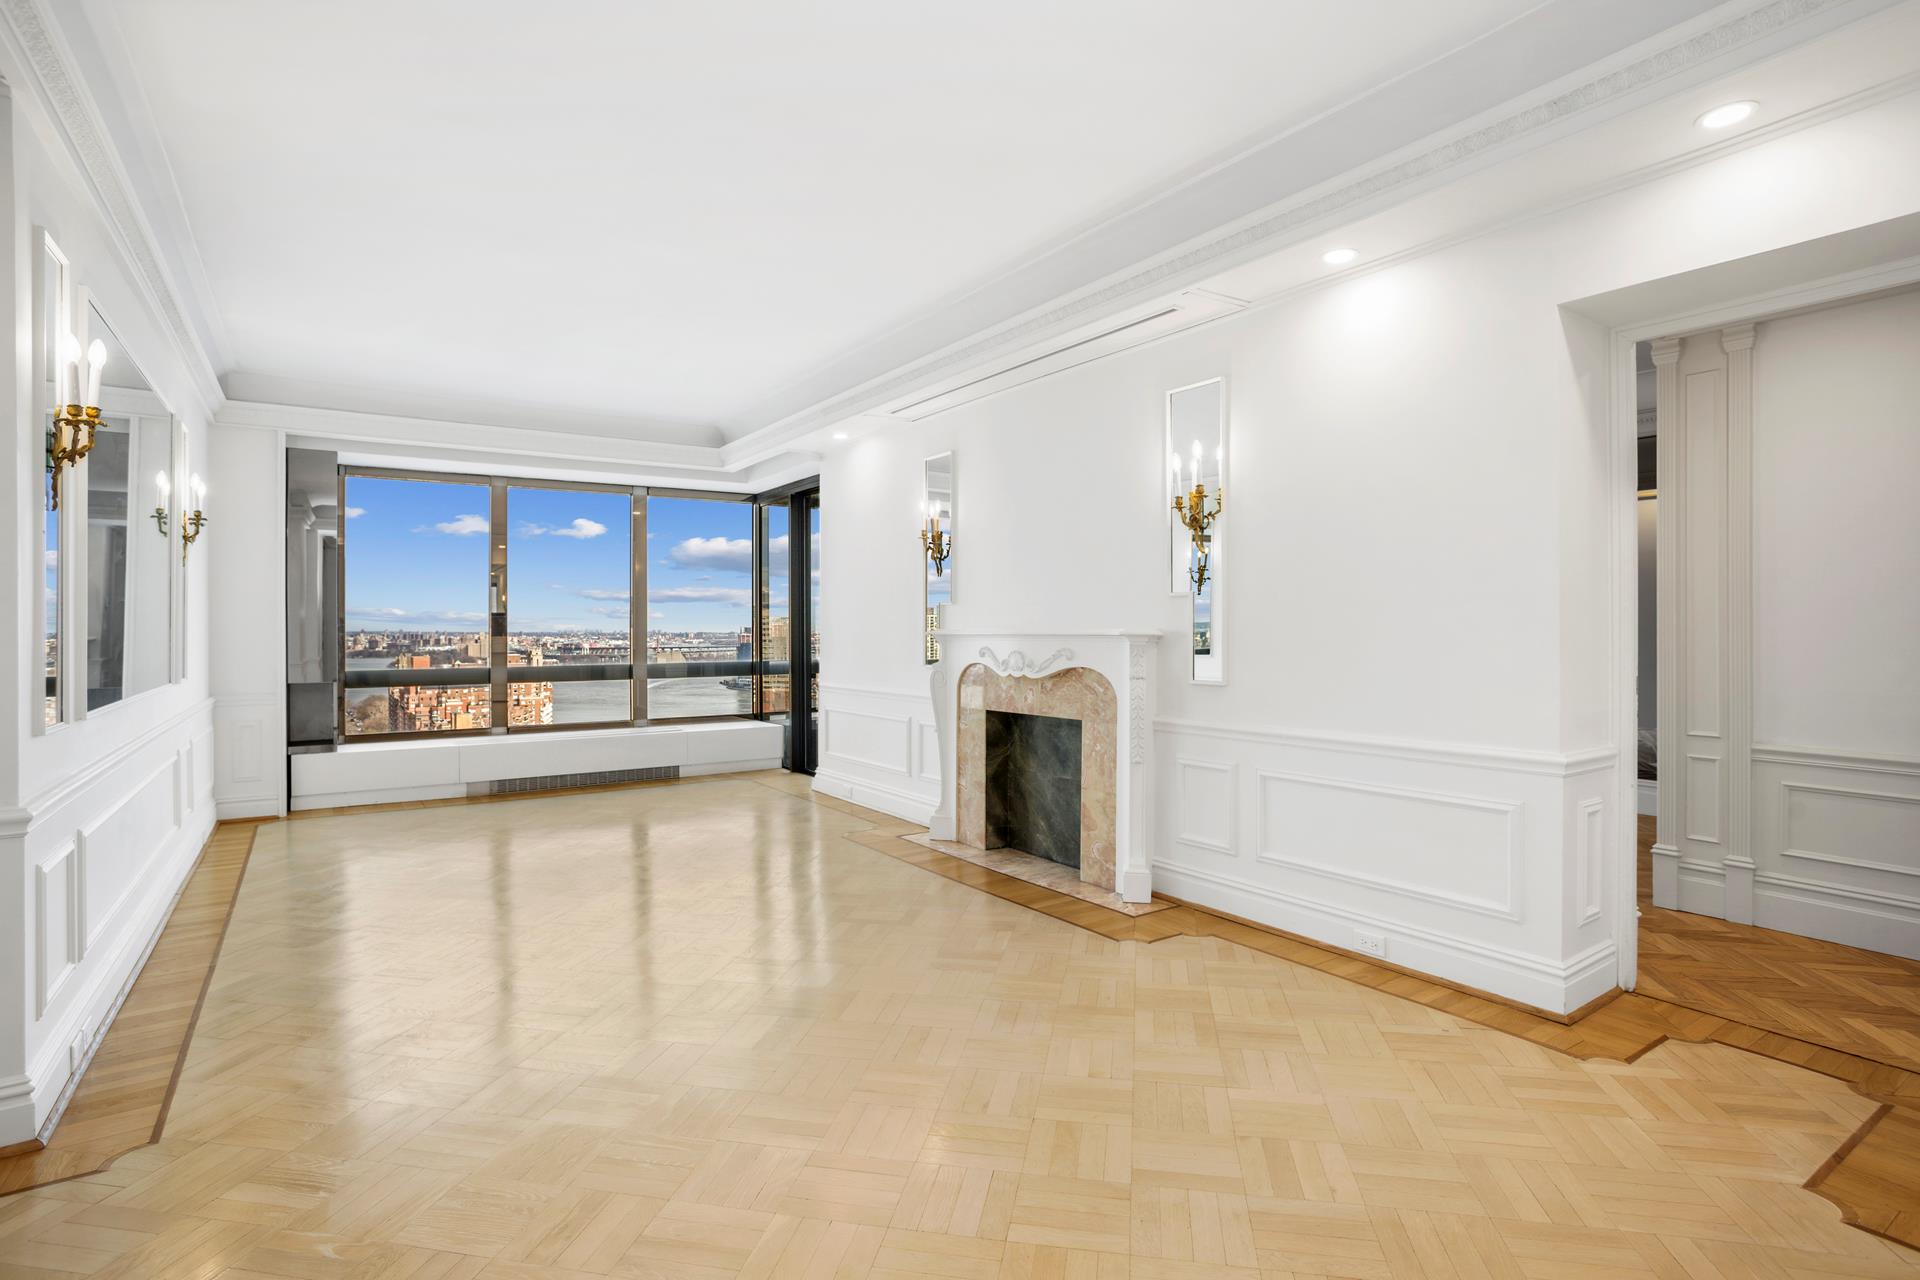 530 East 76th Street 31E, Lenox Hill, Upper East Side, NYC - 2 Bedrooms  
2 Bathrooms  
4 Rooms - 